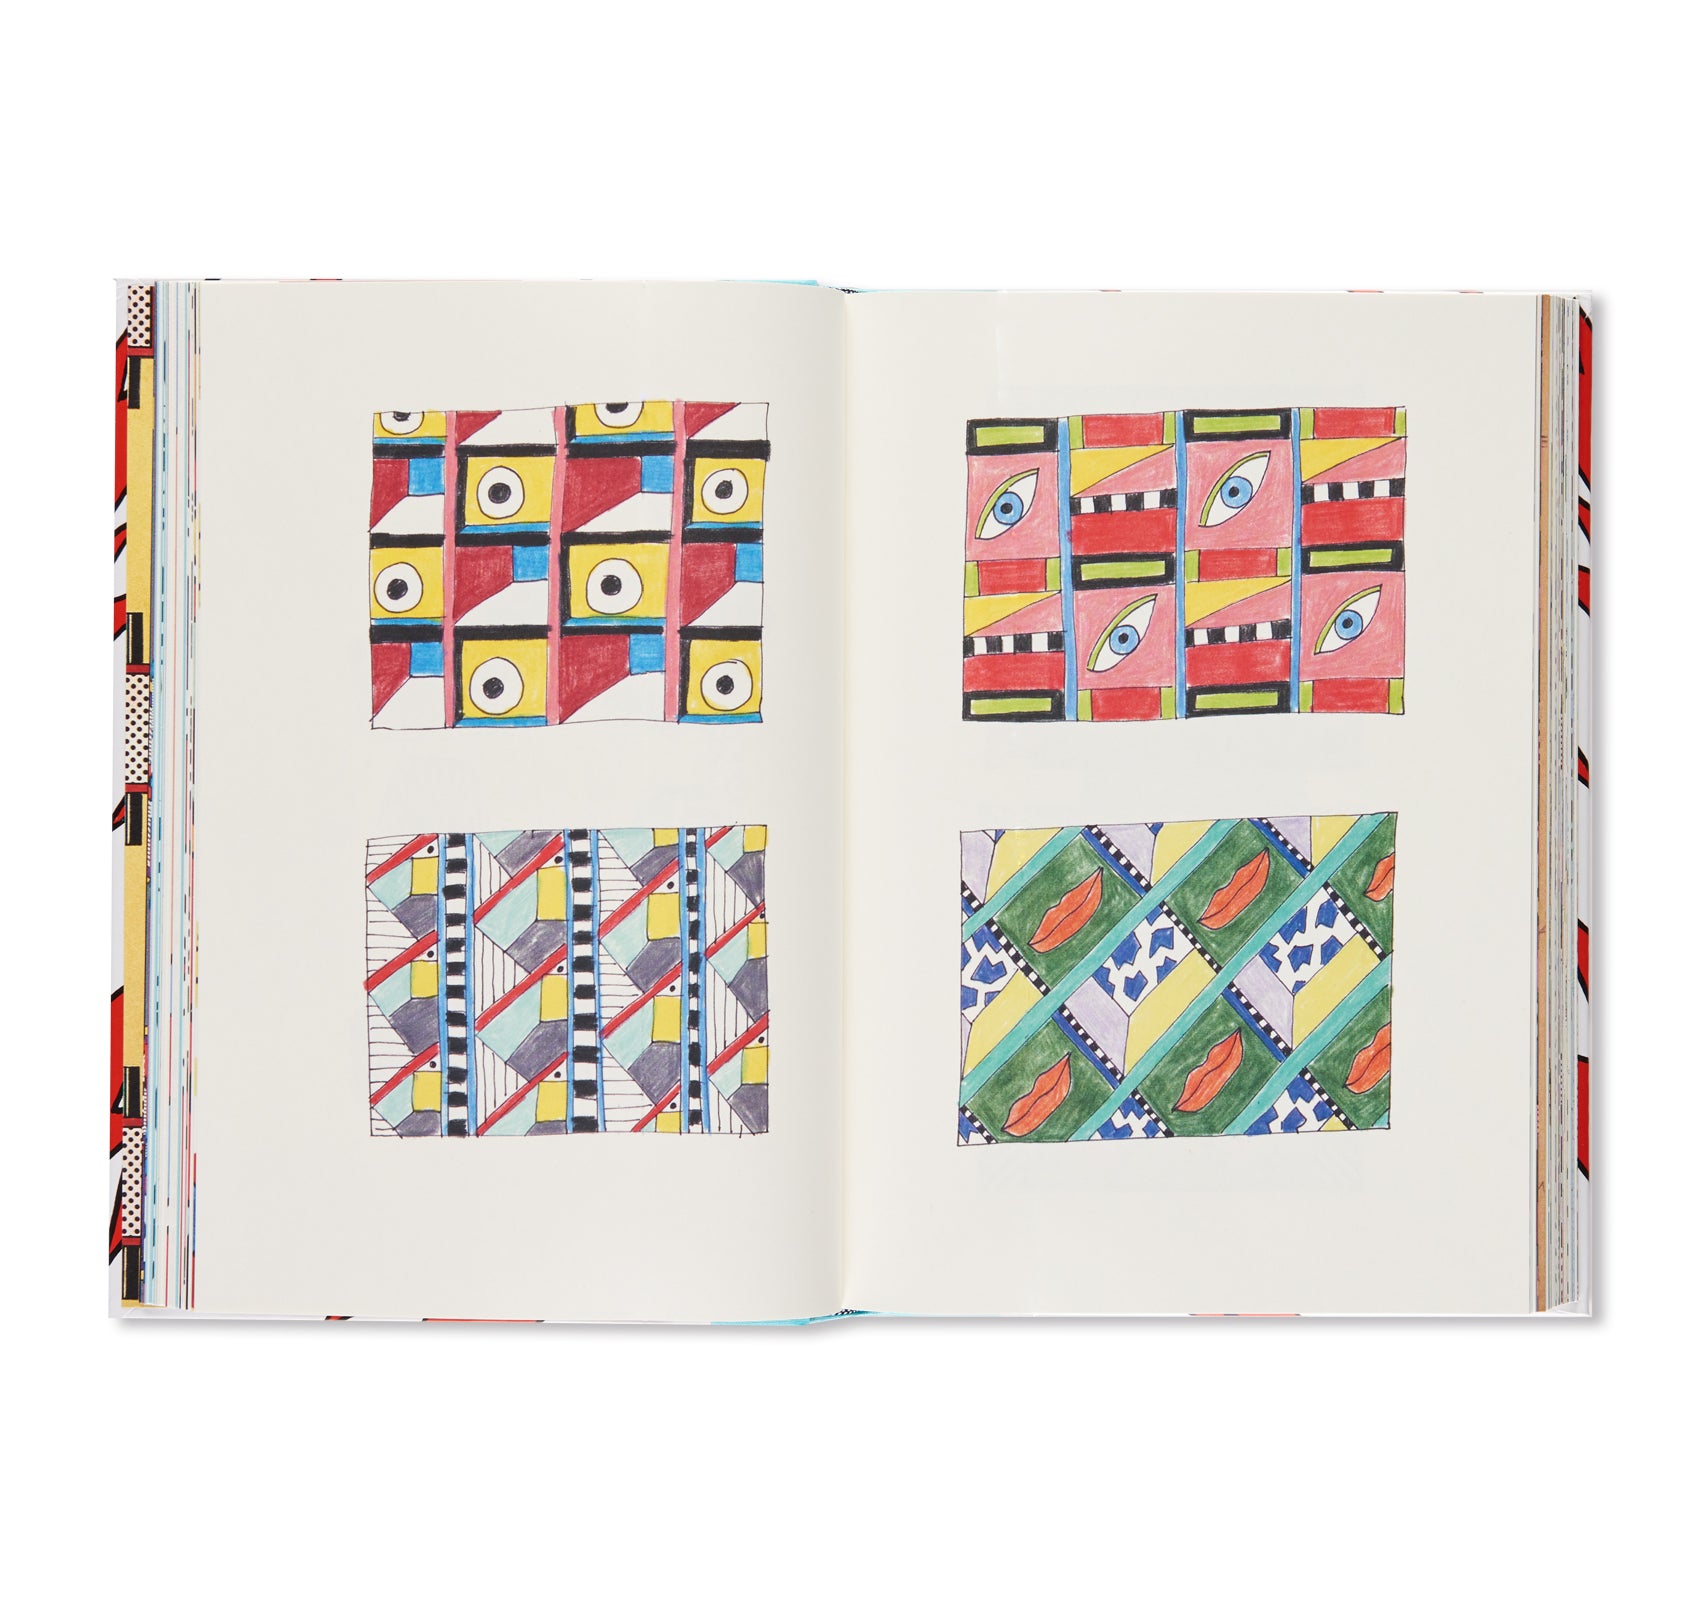 DON'T TAKE THESE DRAWINGS SERIOUSLY 1981-1987 by Nathalie Du Pasquier